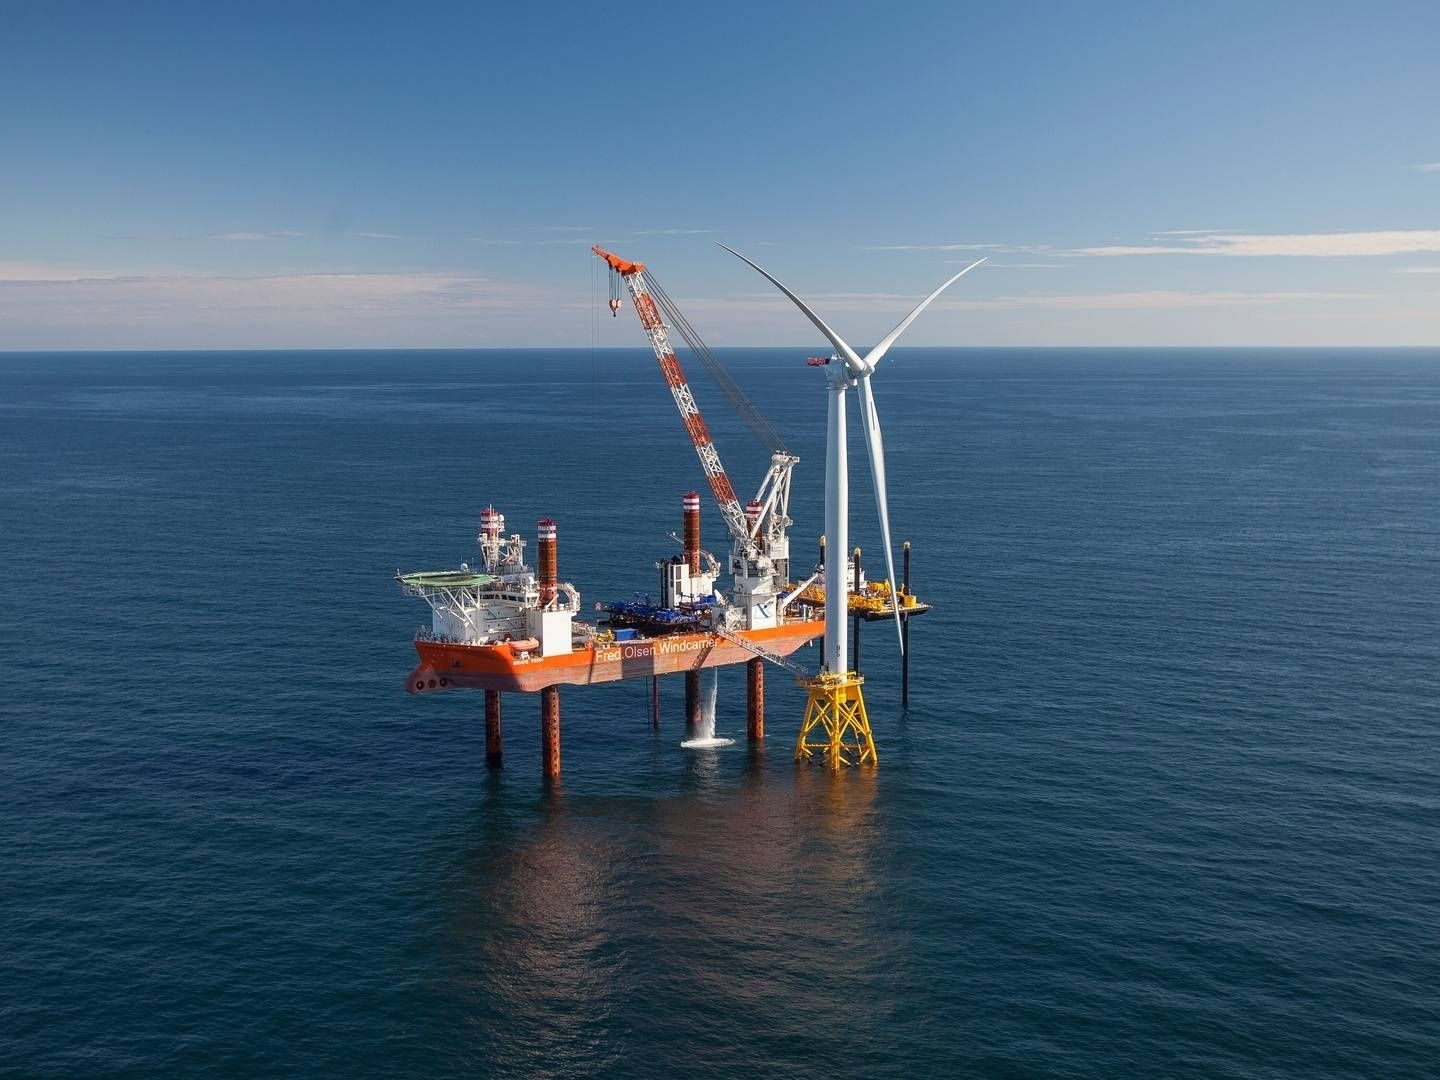 The market for offshore wind turbine installation is predicted to grow rapidly in the coming years. Photo is unrelated to Keppel's shipbuilding order. | Photo: Norges Rederiforbund/Norwegian Shipowners' Association